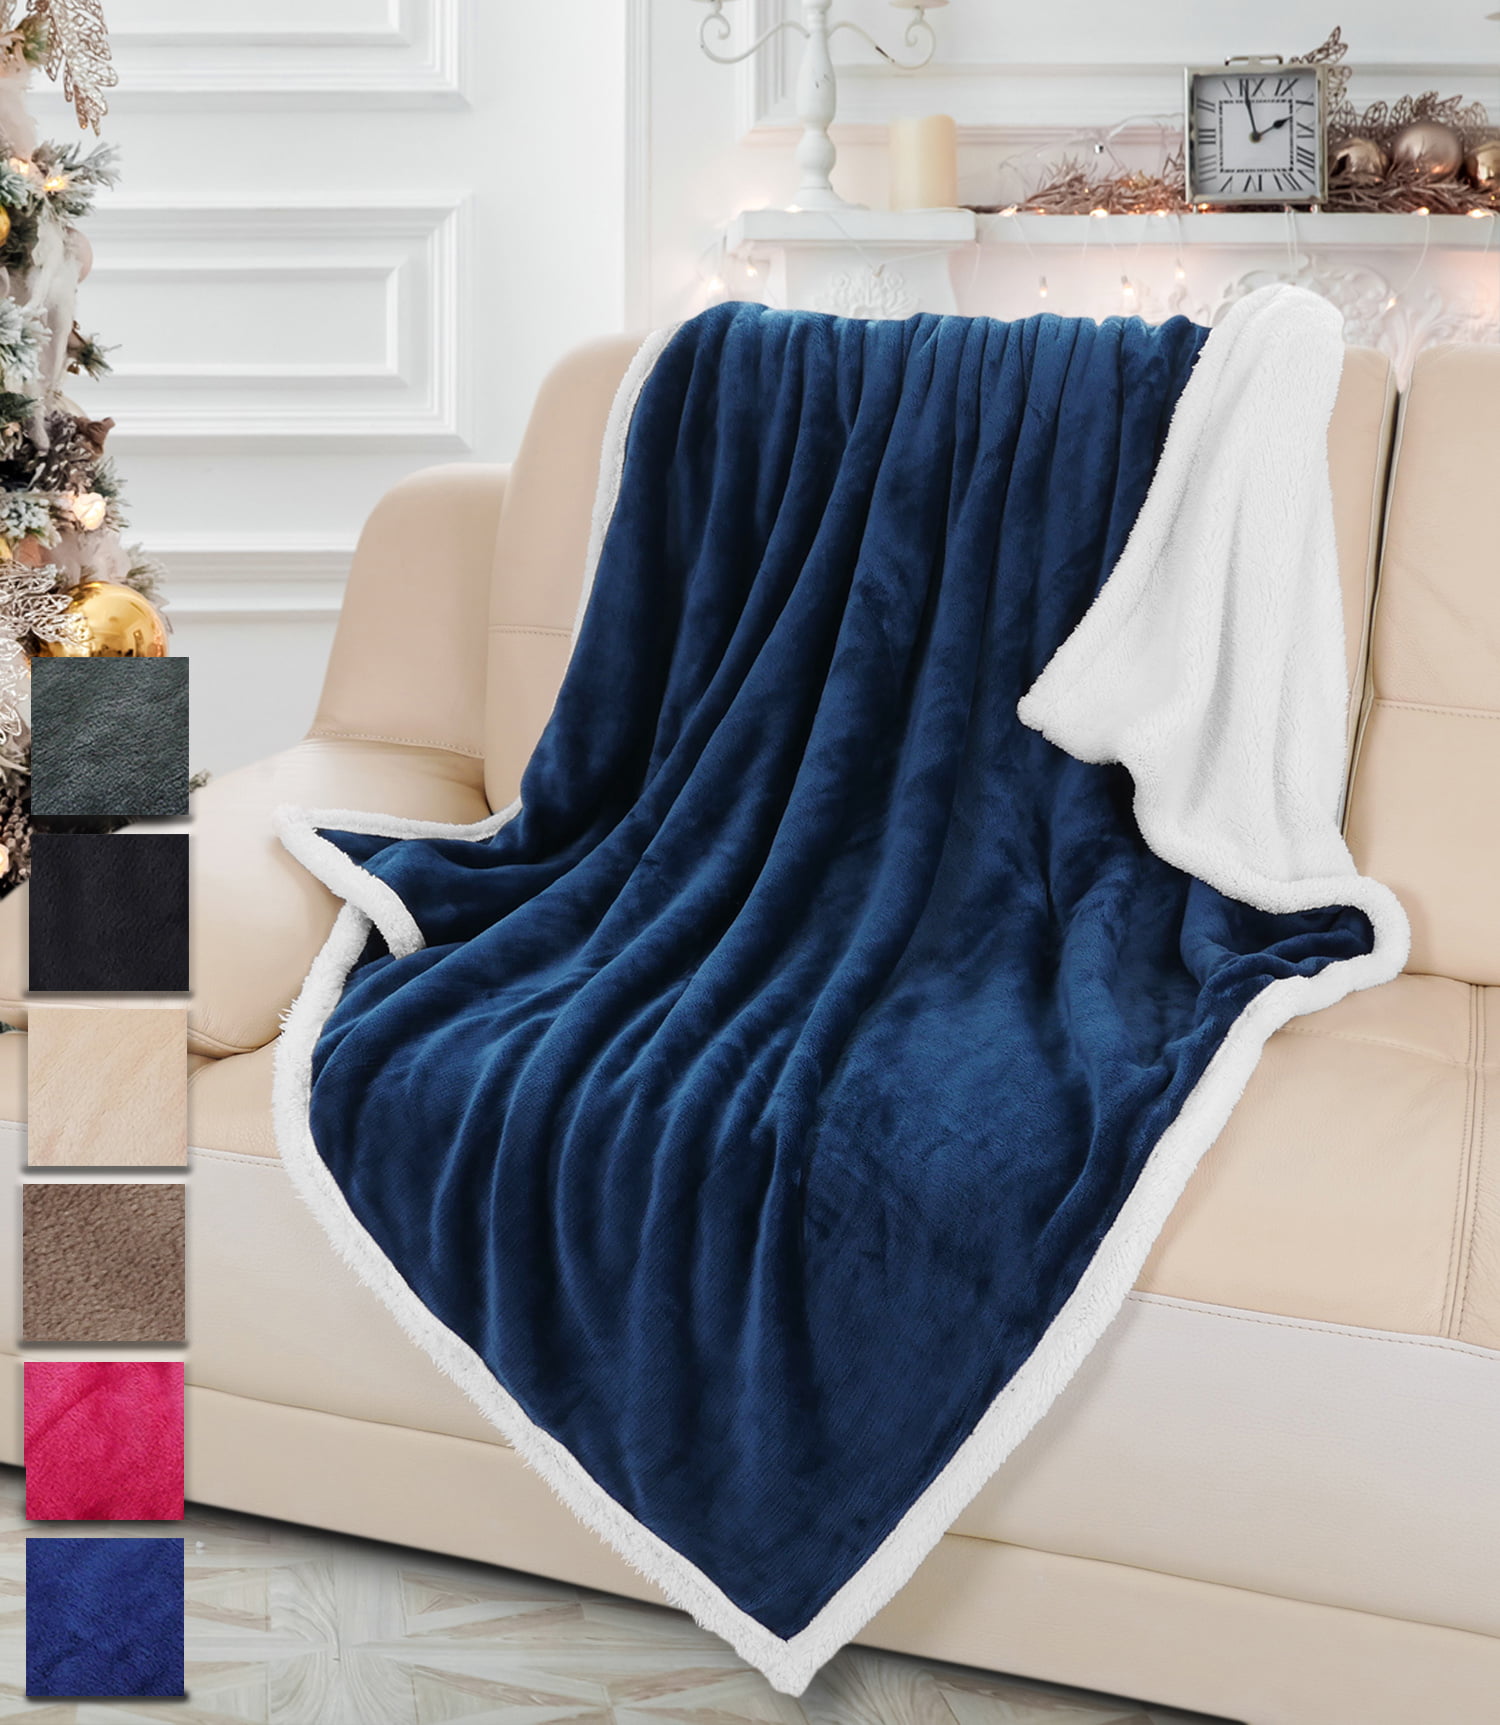 49''x59'' Advancey Sherpa Blanket Fleece Throw Colorful Flower Reversible Microfiber Blanket Ultra Soft Throw Fuzzy Fluffy Cozy Blanket for Bed Sofa Couch